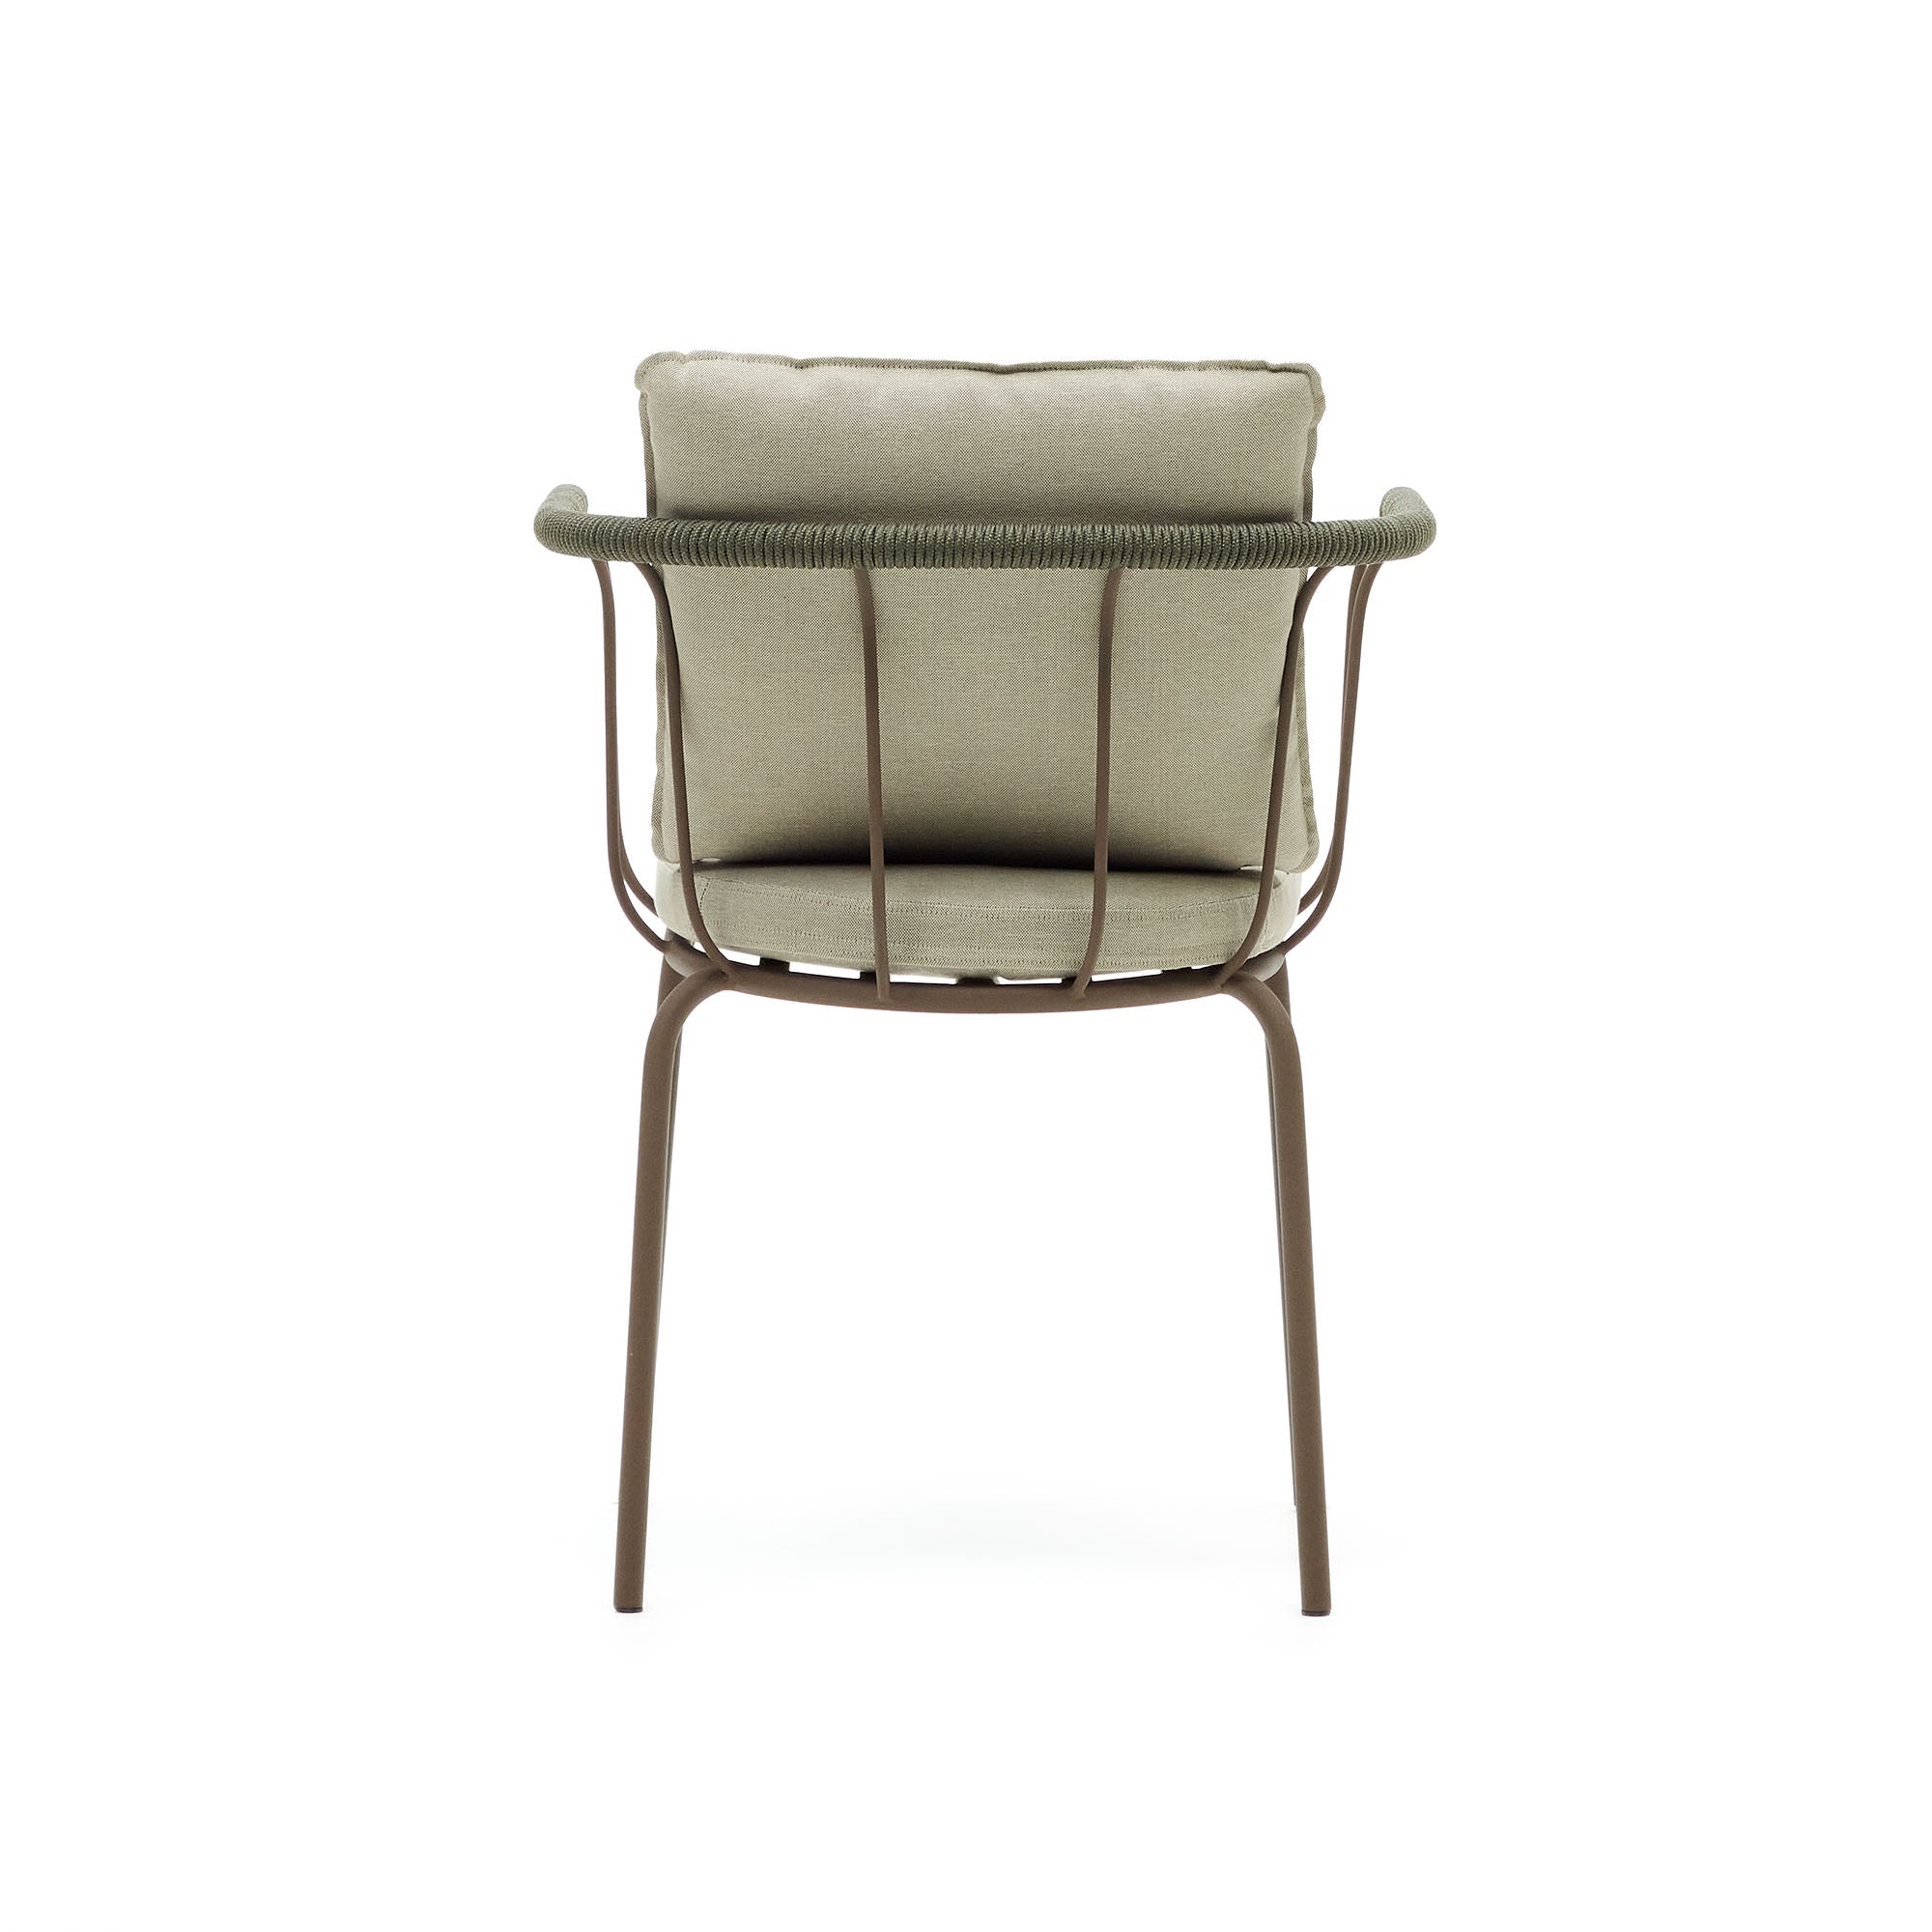 Salguer stackable chair in cord and steel with a brown painted finish